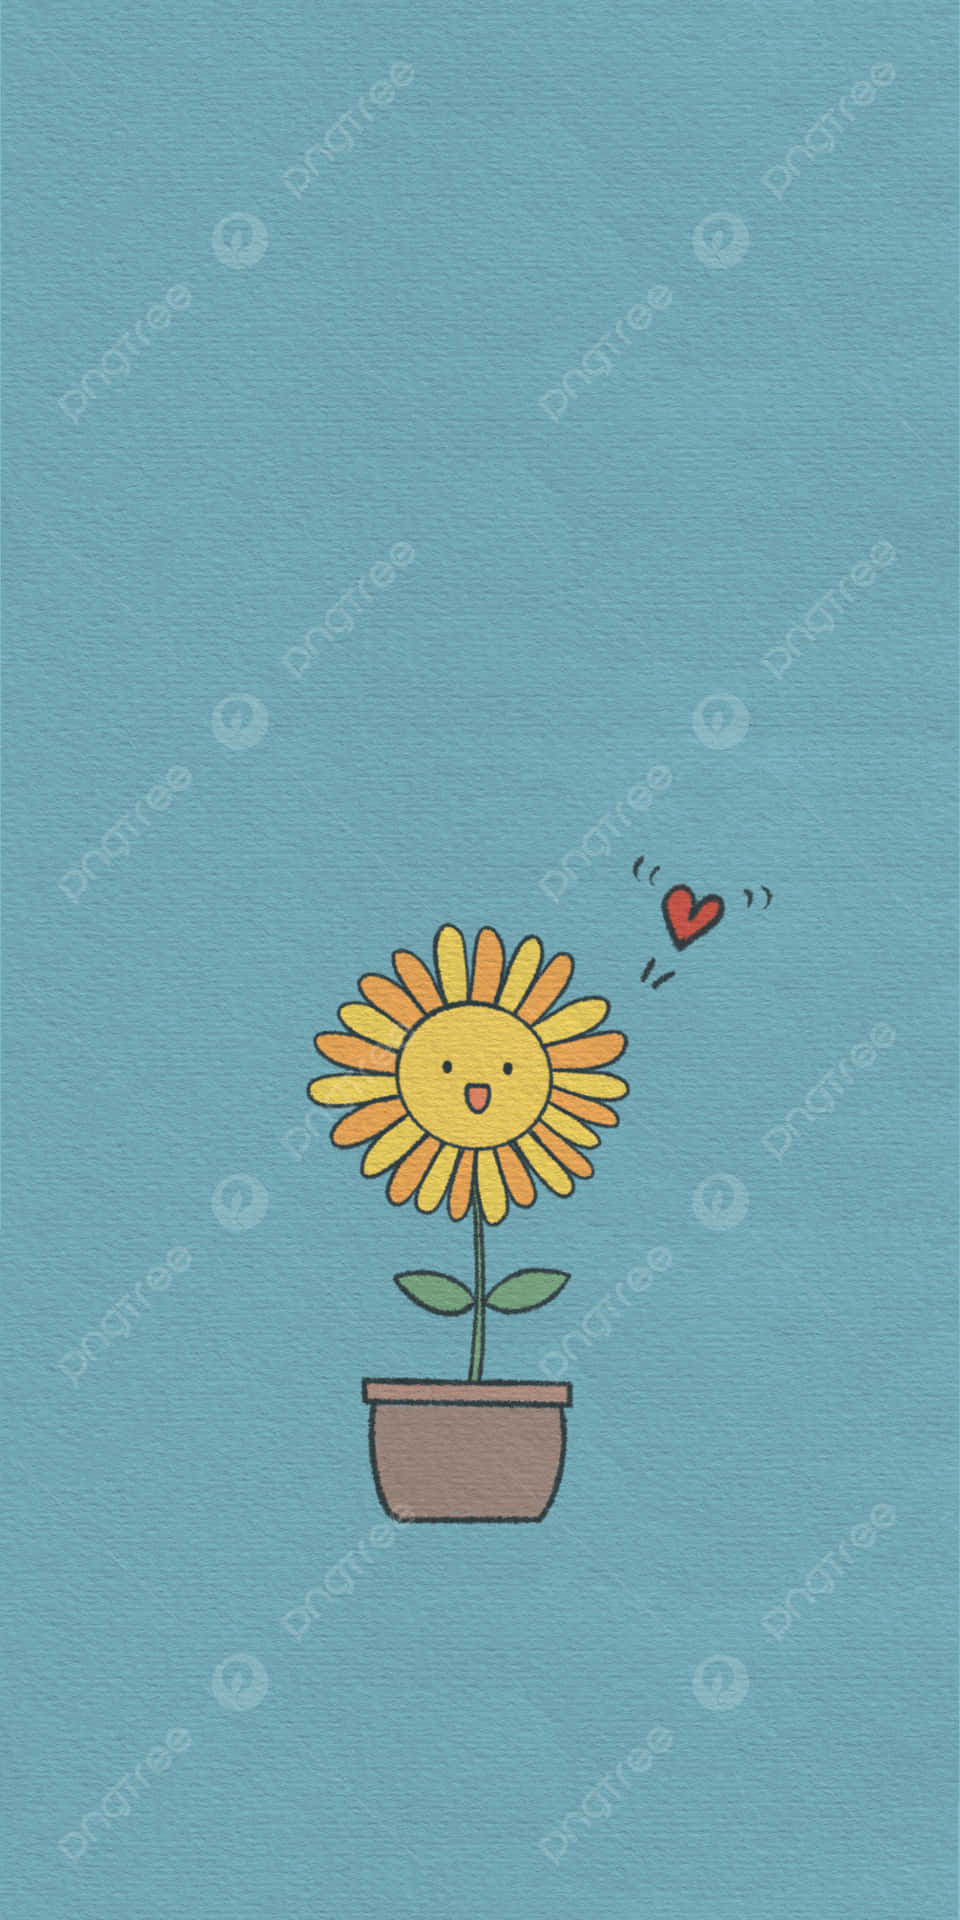 Brighten Up Your Day With This Adorable Cute Sun! Background